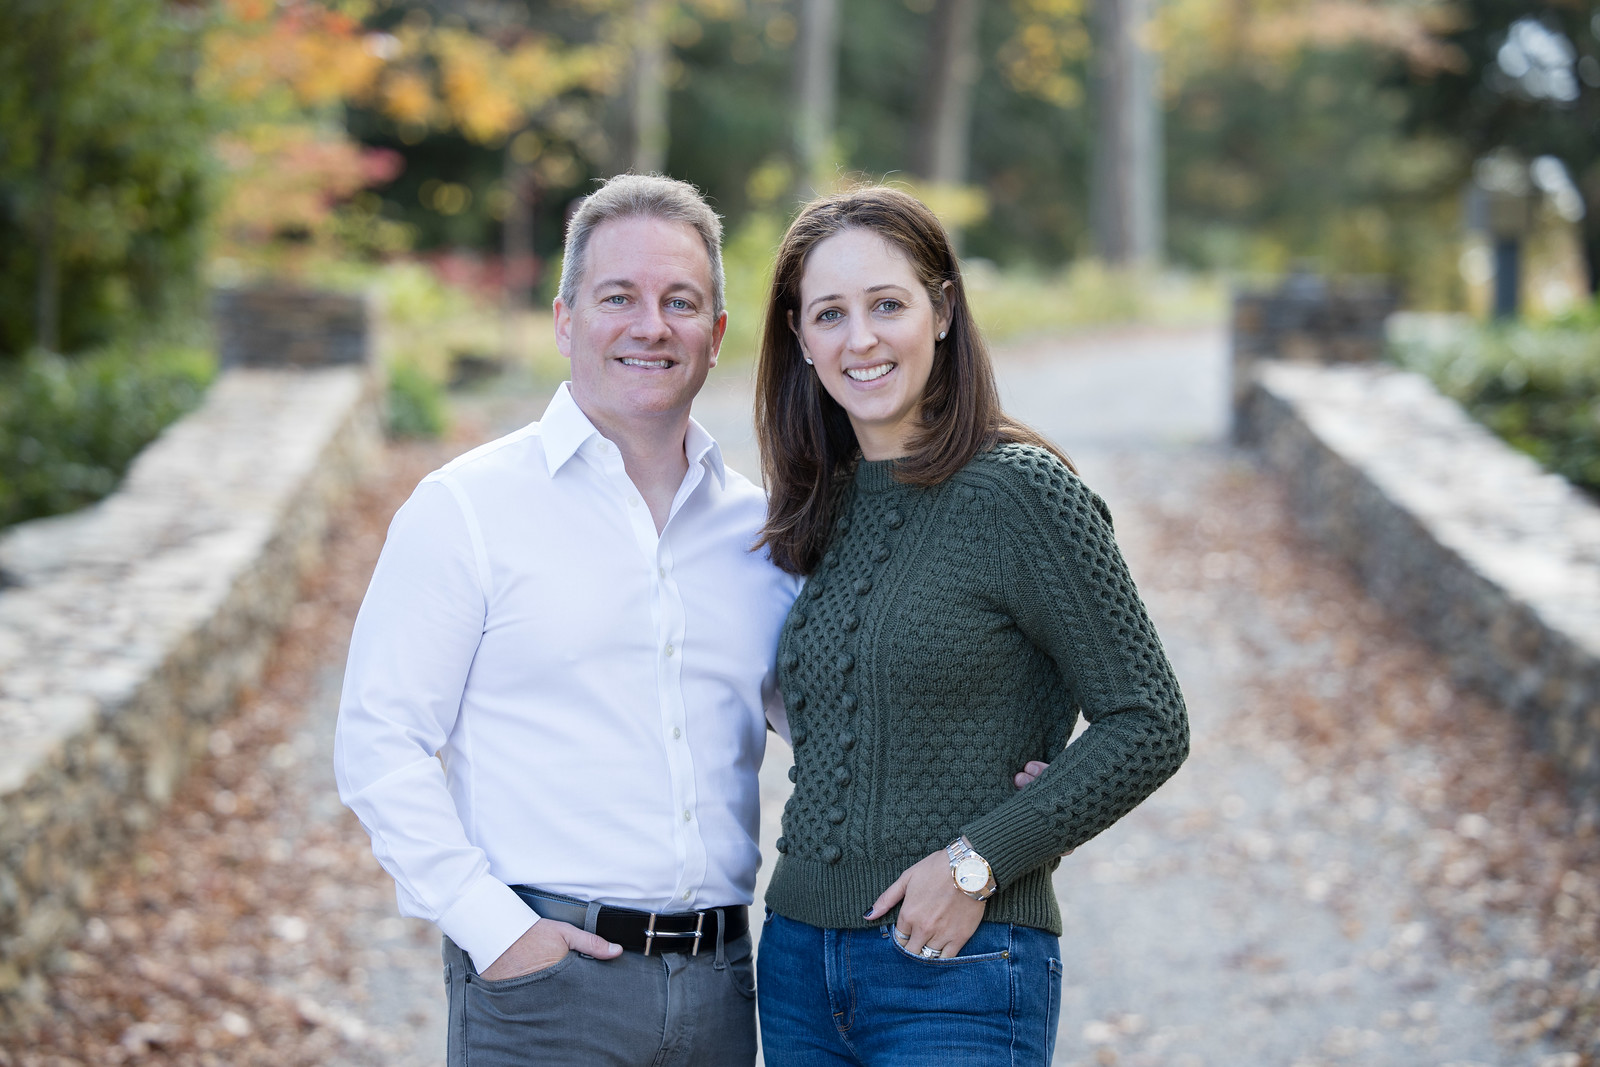 Portrait Photographers CT, CT Family Photographer, Photographer Near Me, Professional Headshots in CT, CT Photoshoot, Baby Photography Connecticut, Face Forward Headshots